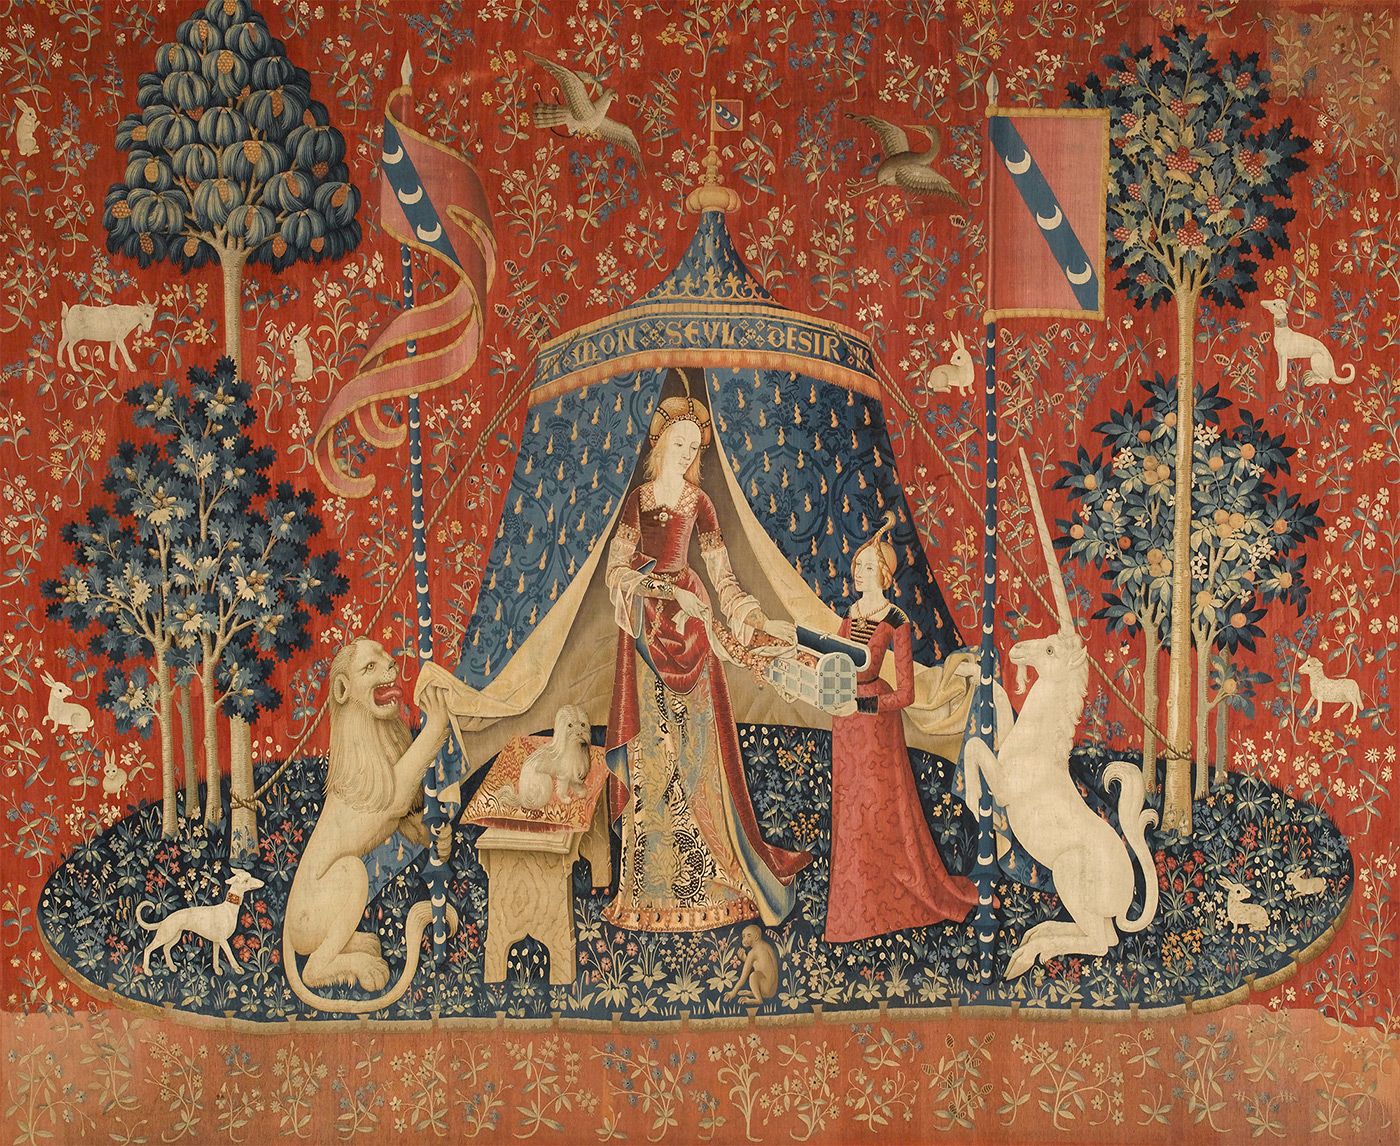 A tapestry details the image of a regal woman who stands with unicorns on either side of her.